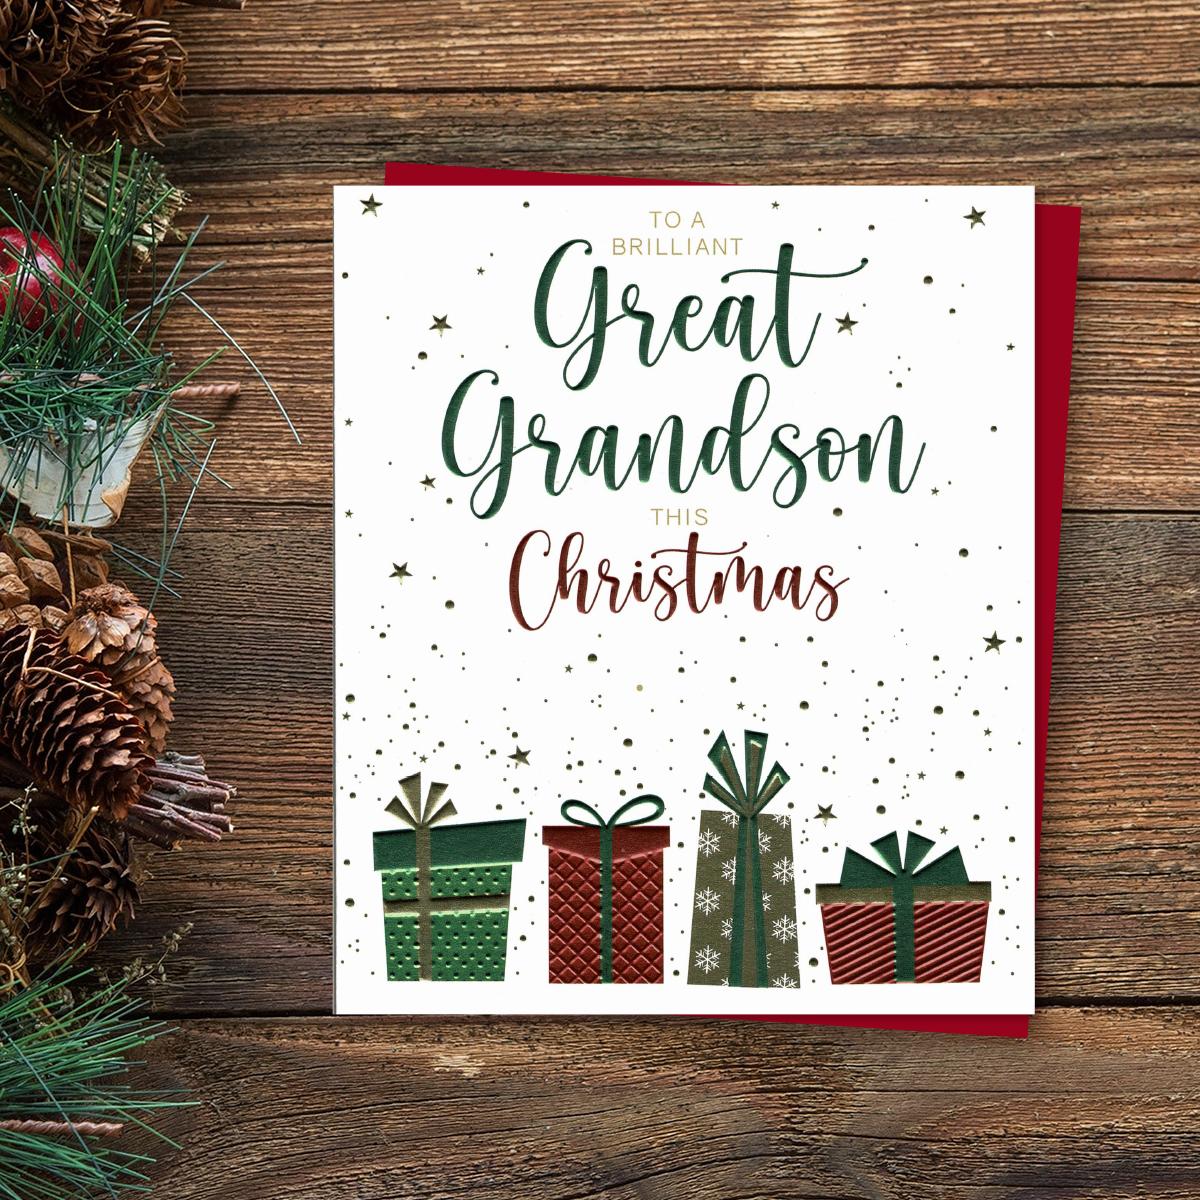 Brilliant Great Grandson Christmas Gifts Card Front Image